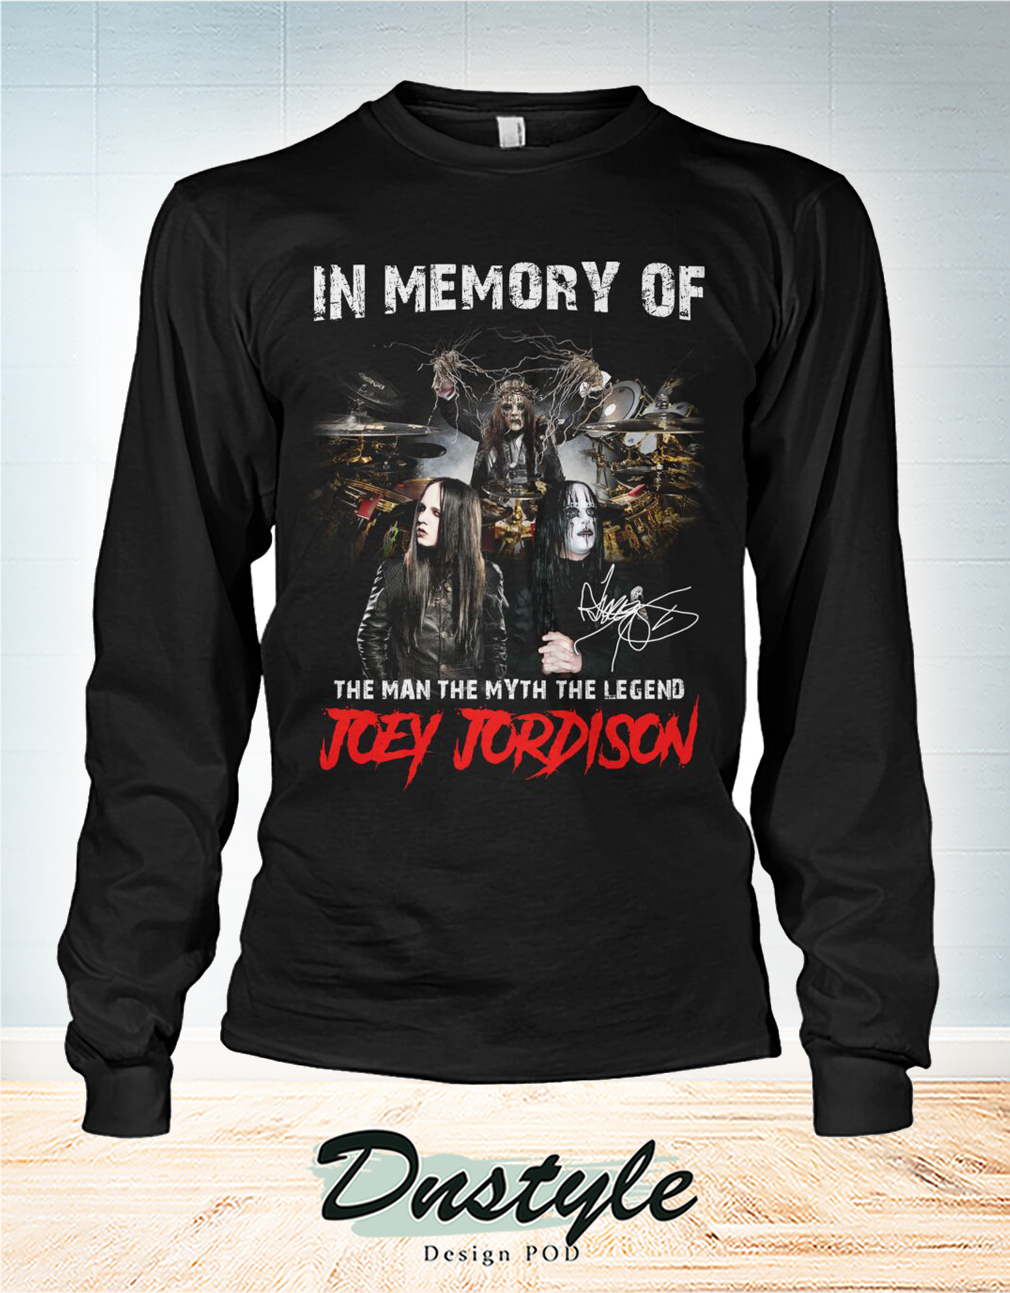 In memory of the man the myth the legend Joey Jordison long sleeve